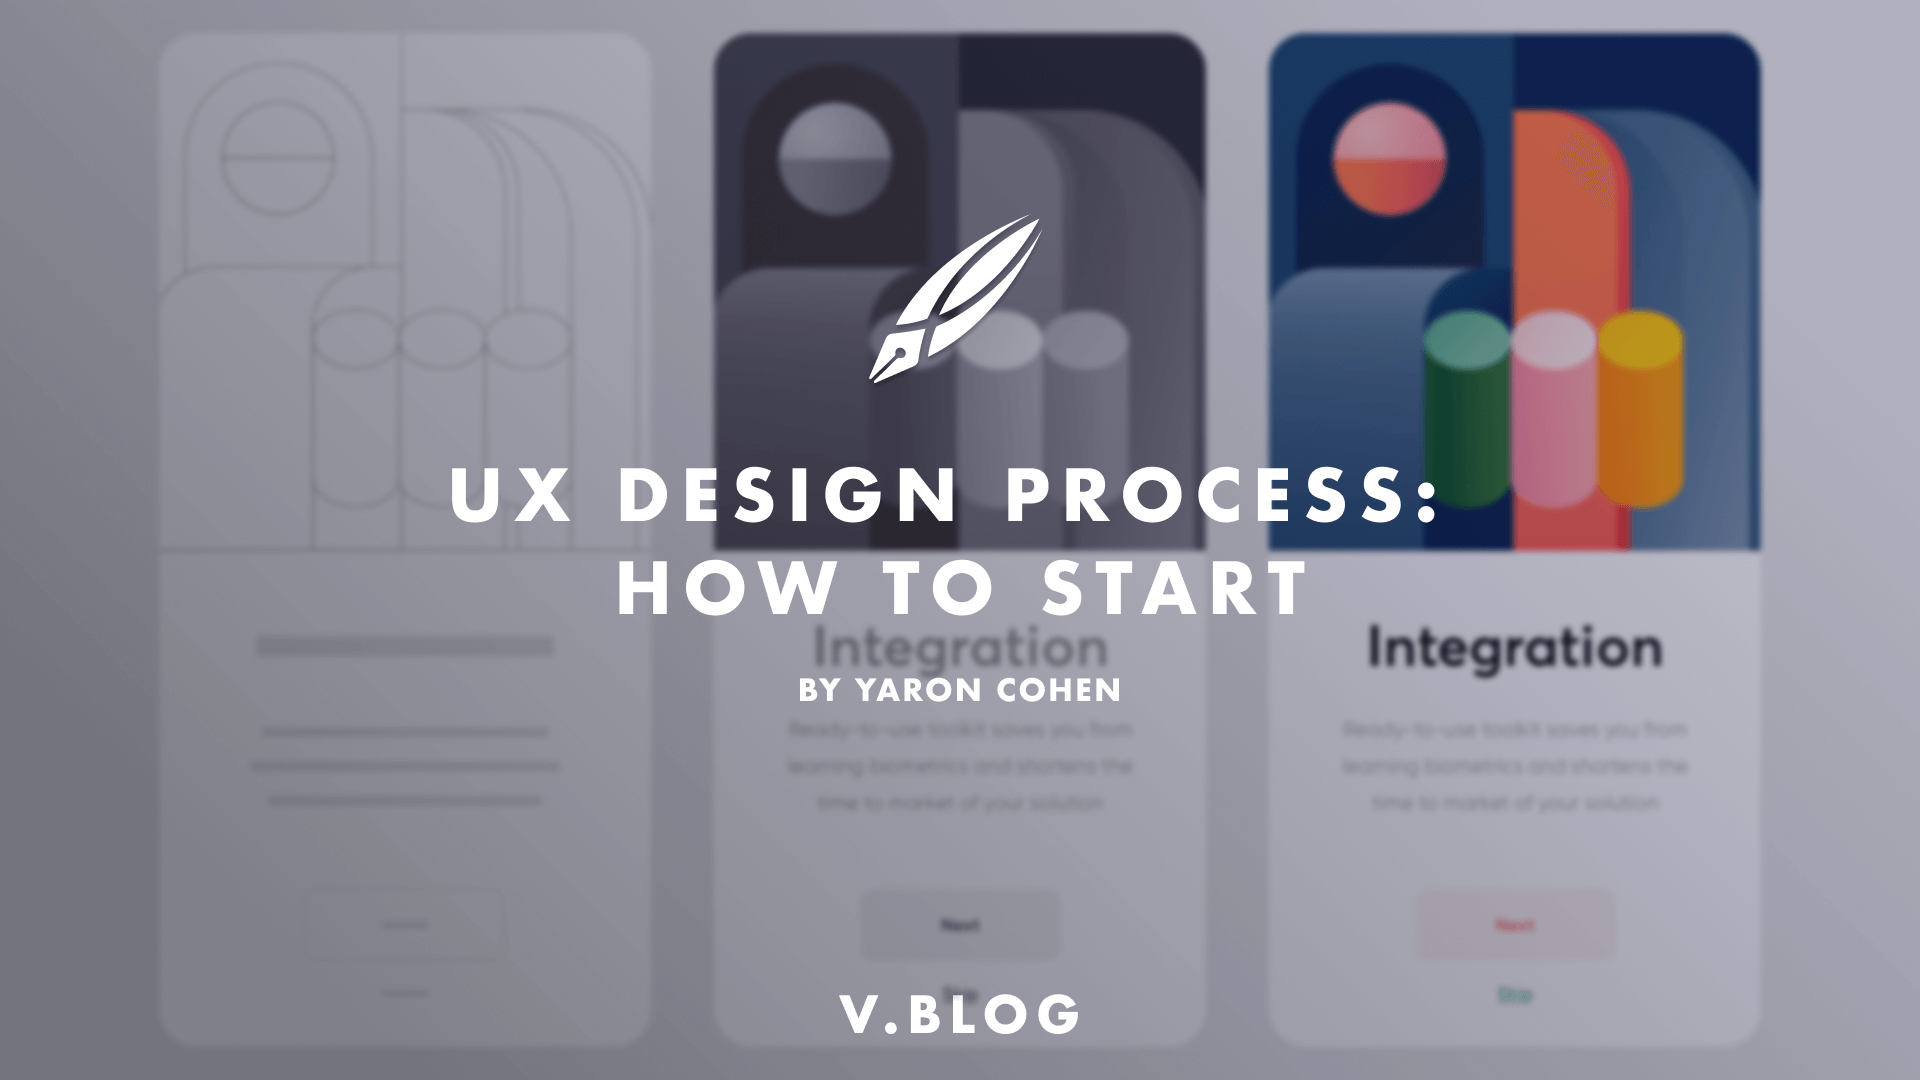 UX design process: how to start and what are the steps | Linearity